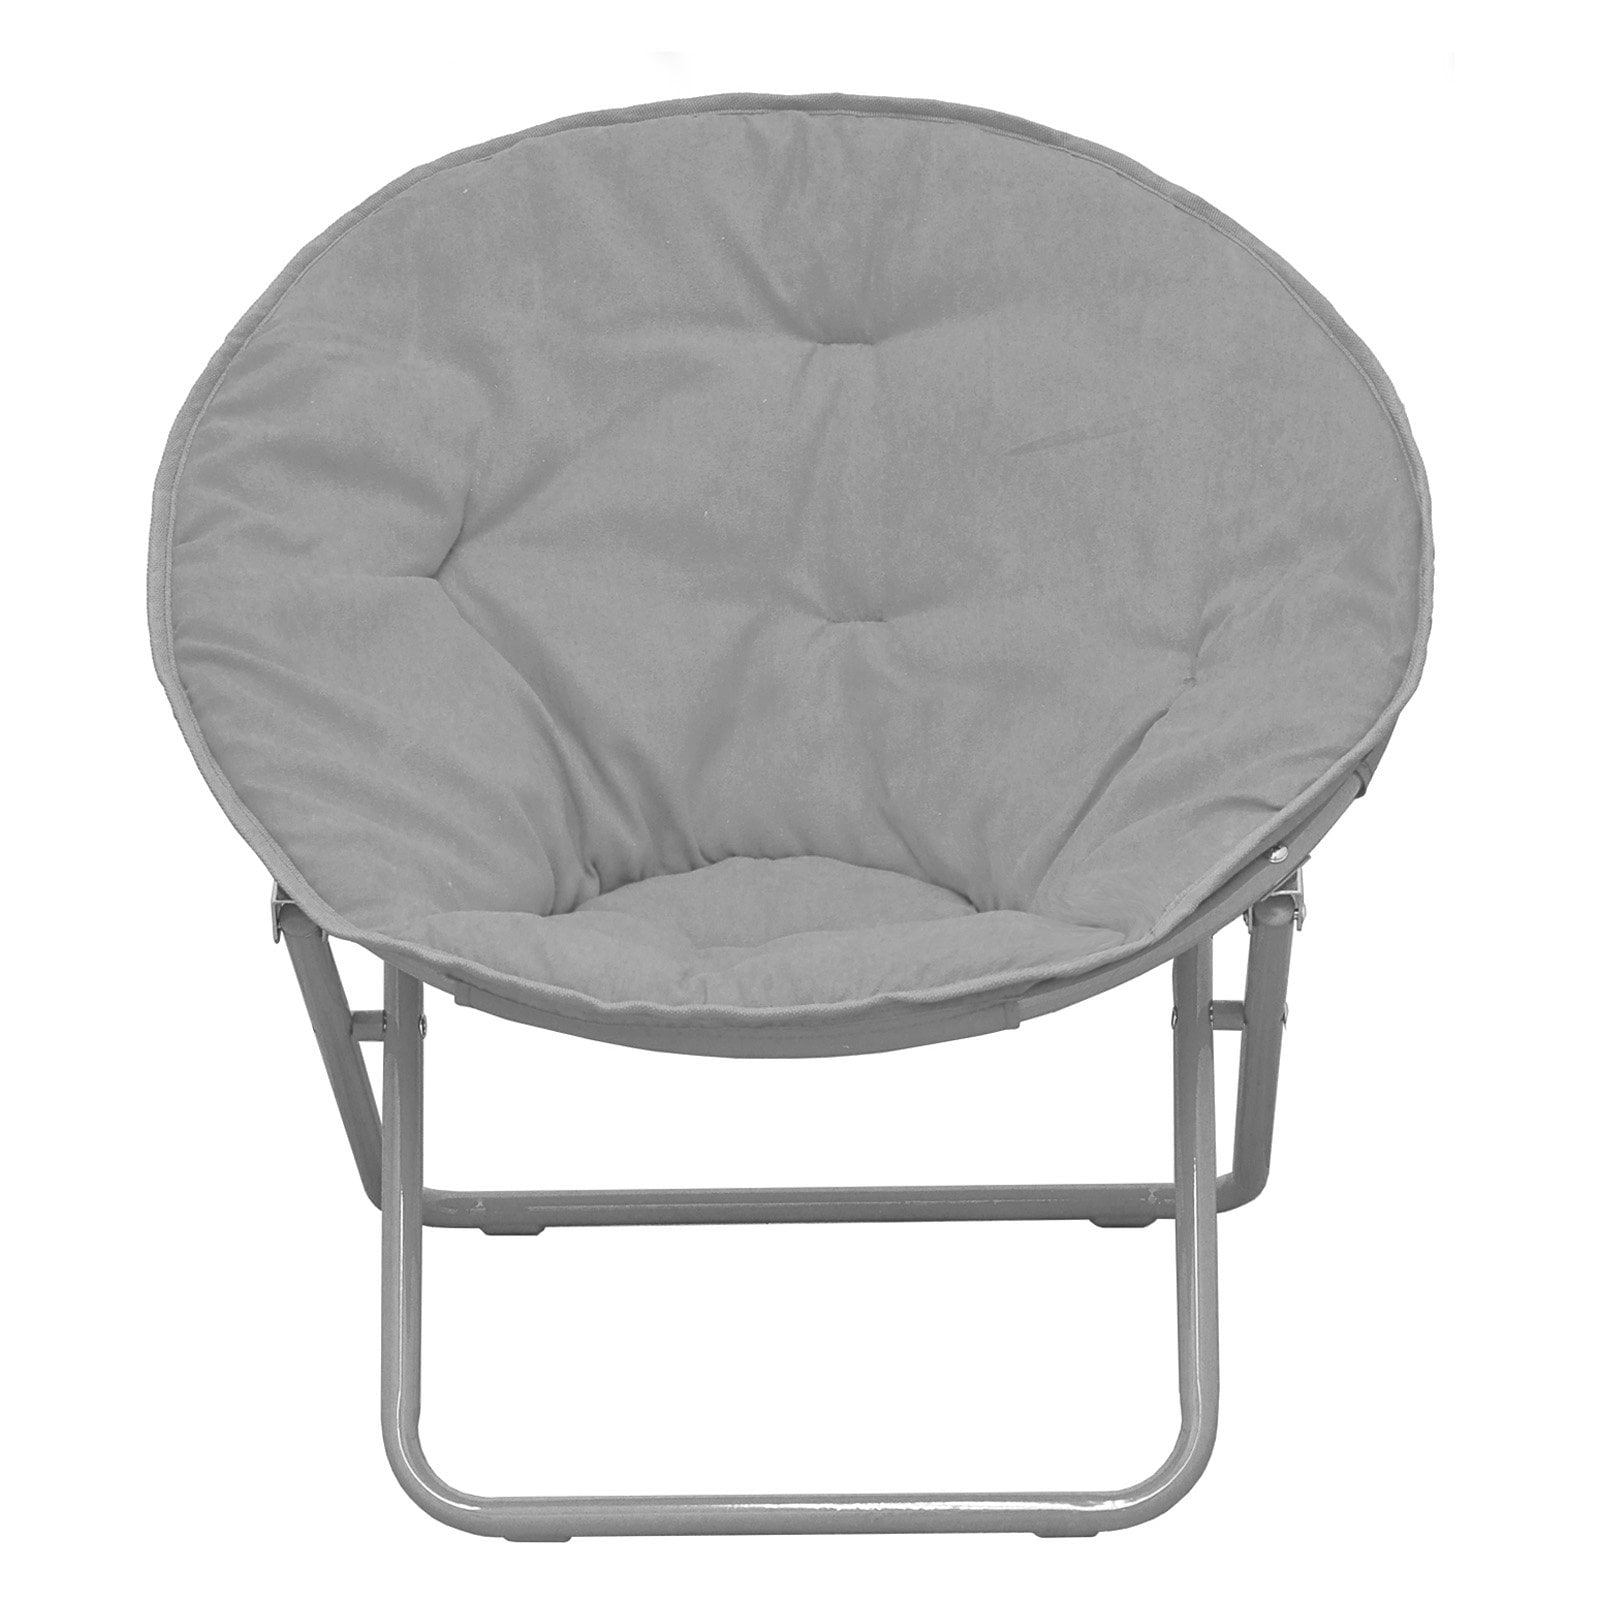 saucer chair for girls